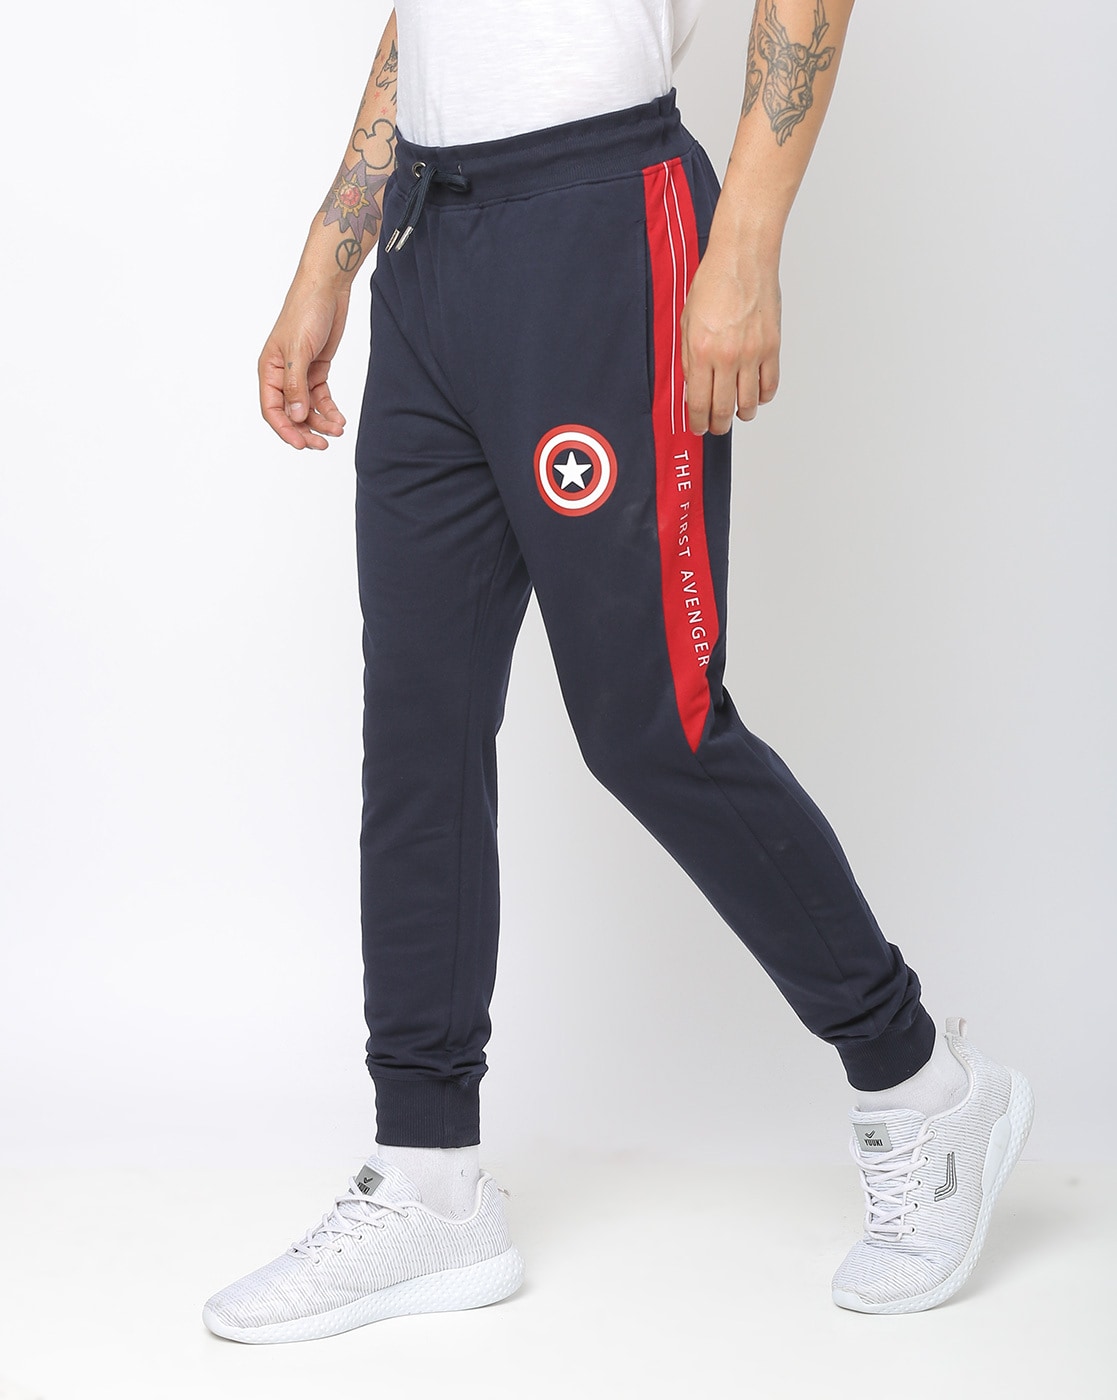 Need help finding this exact pair of men's pajama pants. Tag reads Marvel  size S. Marvel/Disney, Amazon, Walmart/Target don't have it and I'm not  sure if I'm overlooking something to find this.